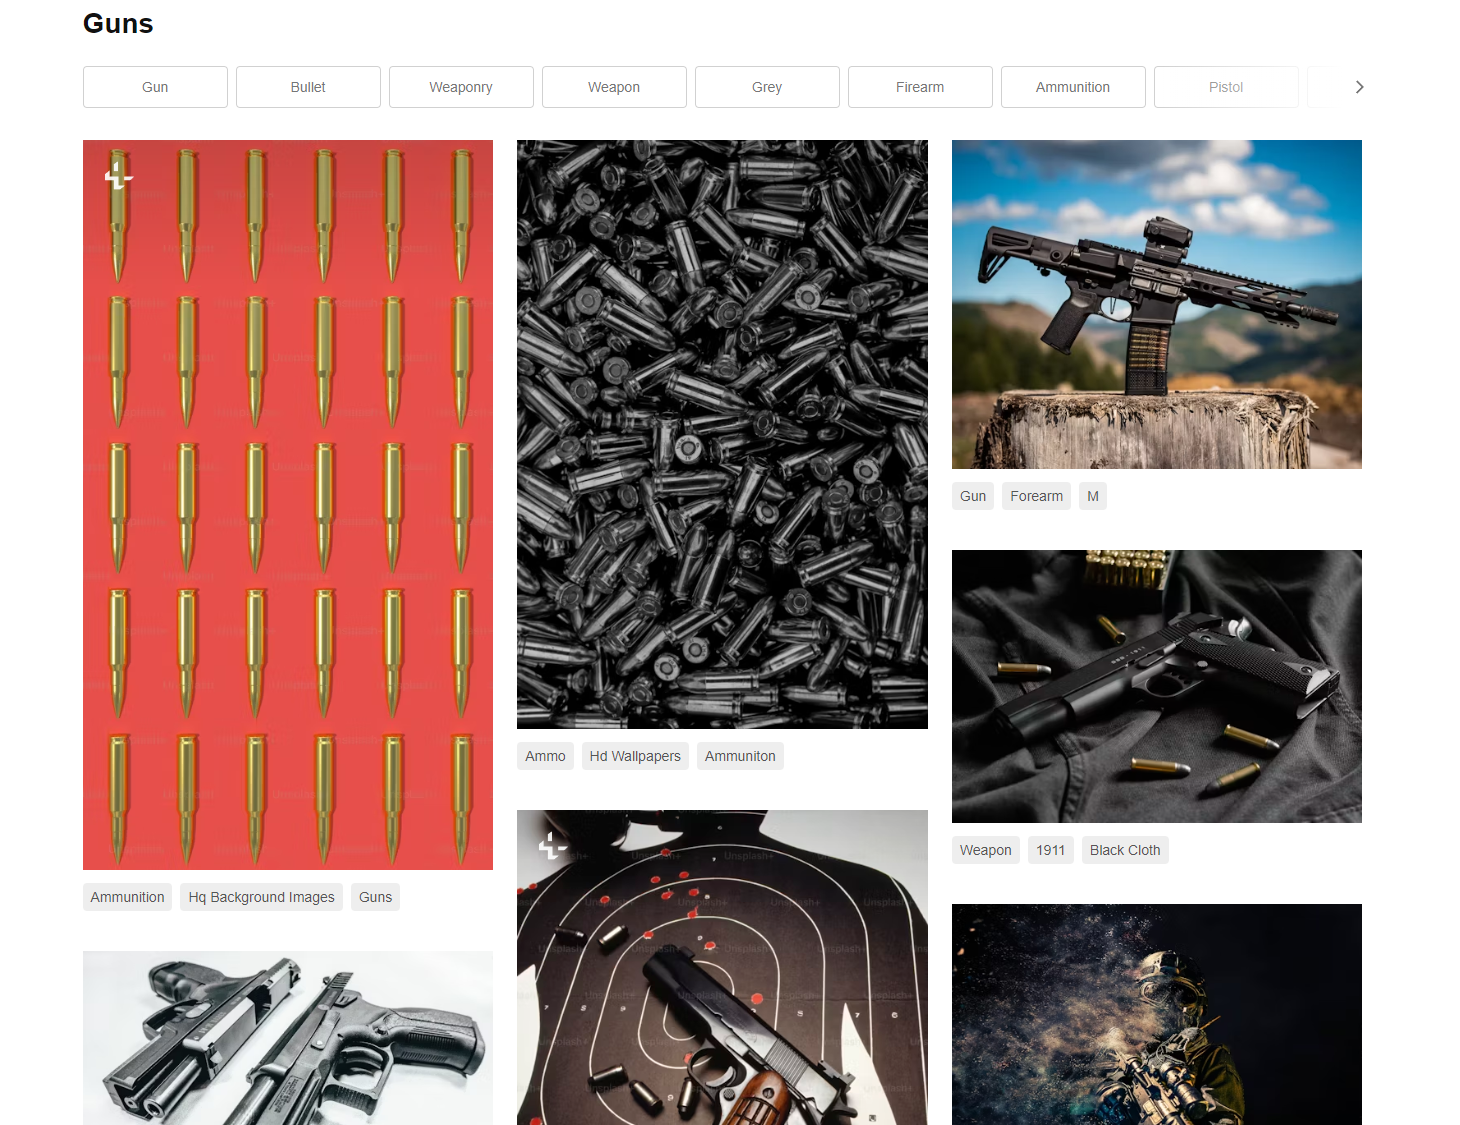 Screenshot from Unsplash showing results for the query "Guns"